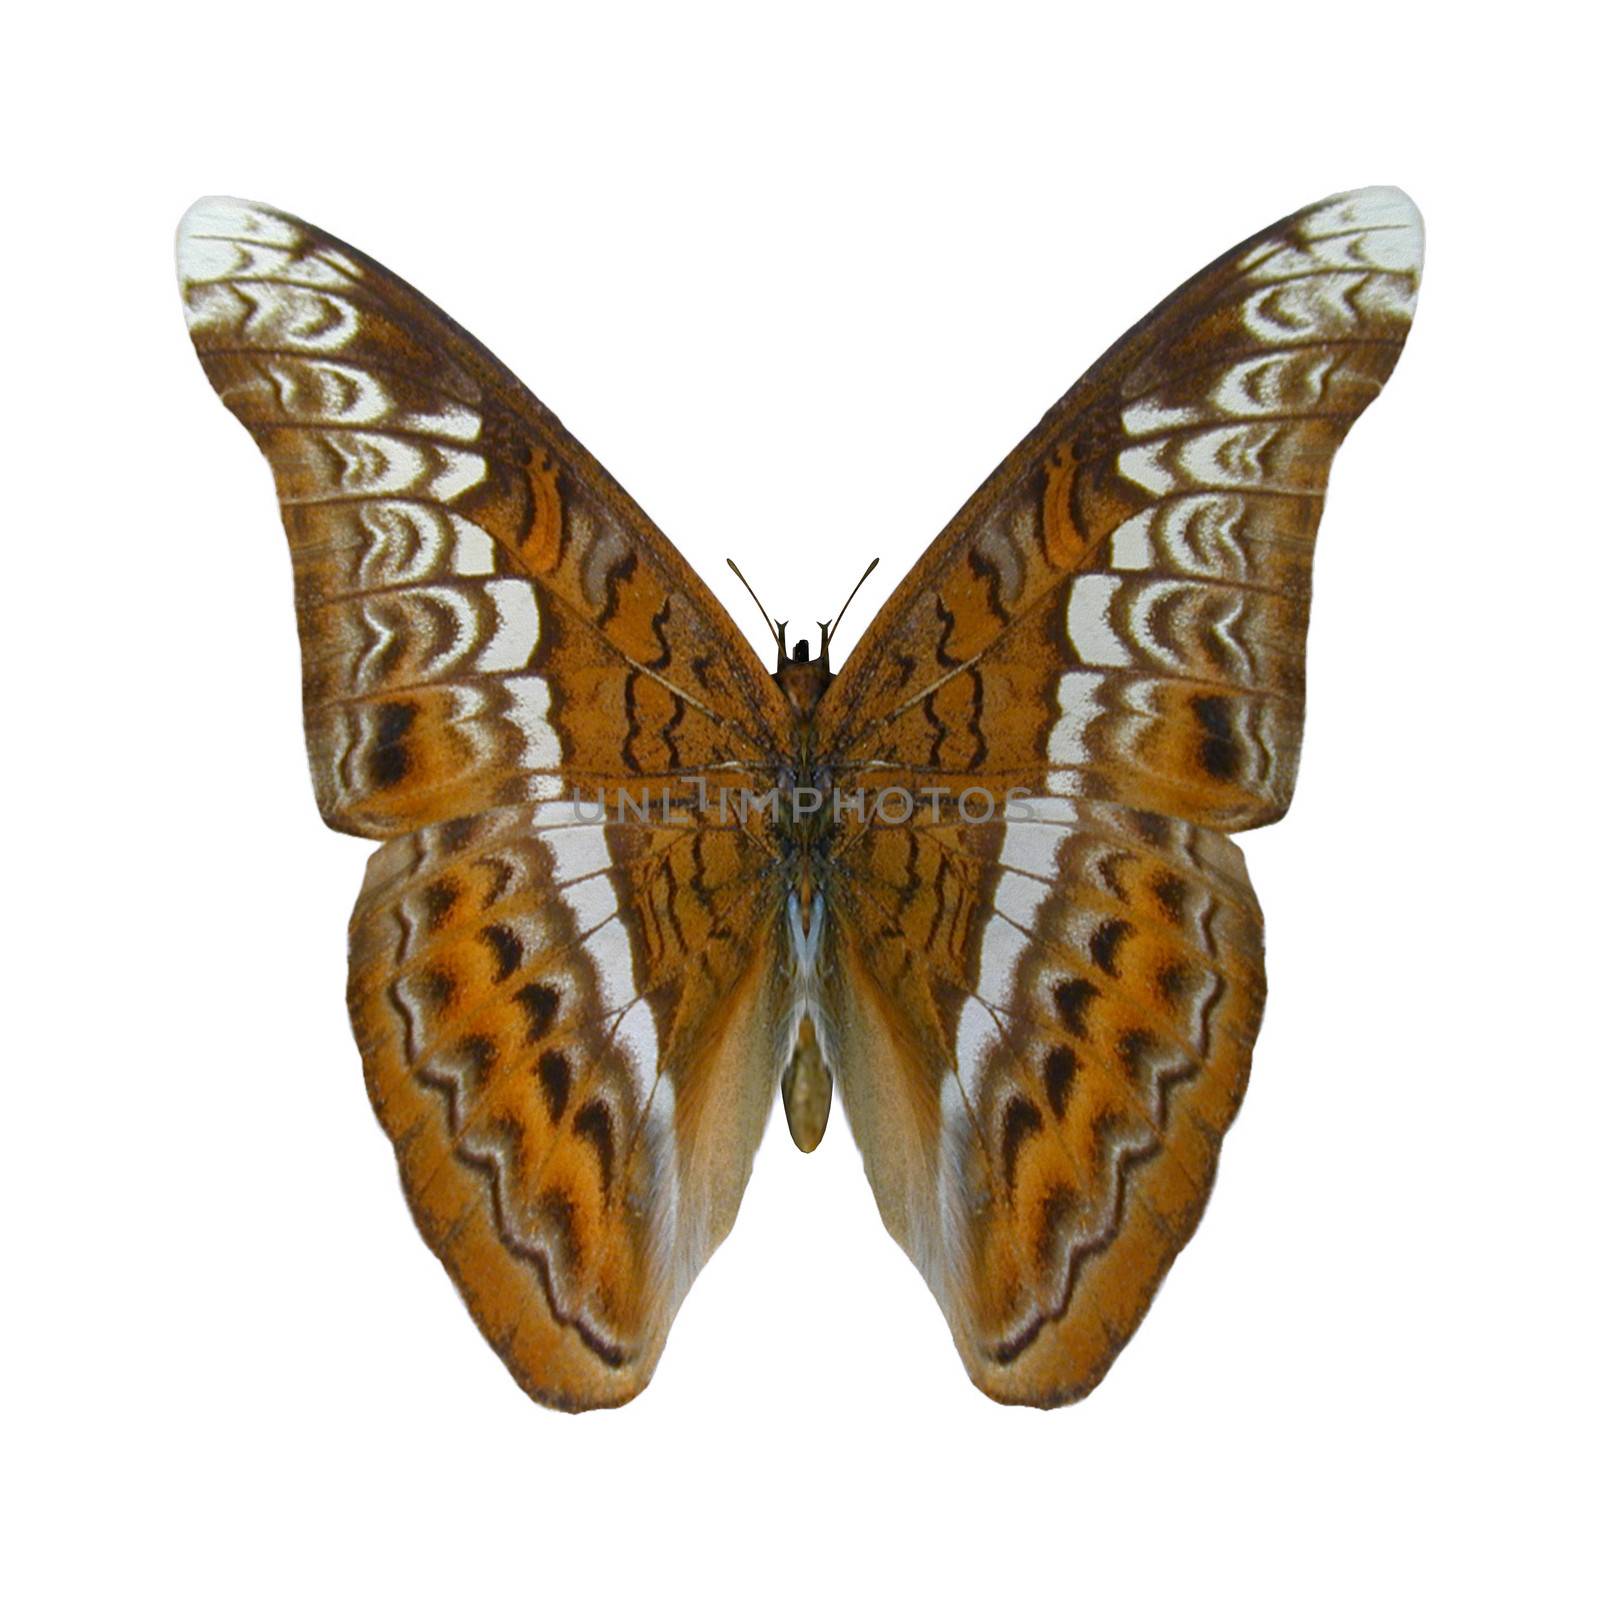 3D digital render of an admiral butterfly on white background